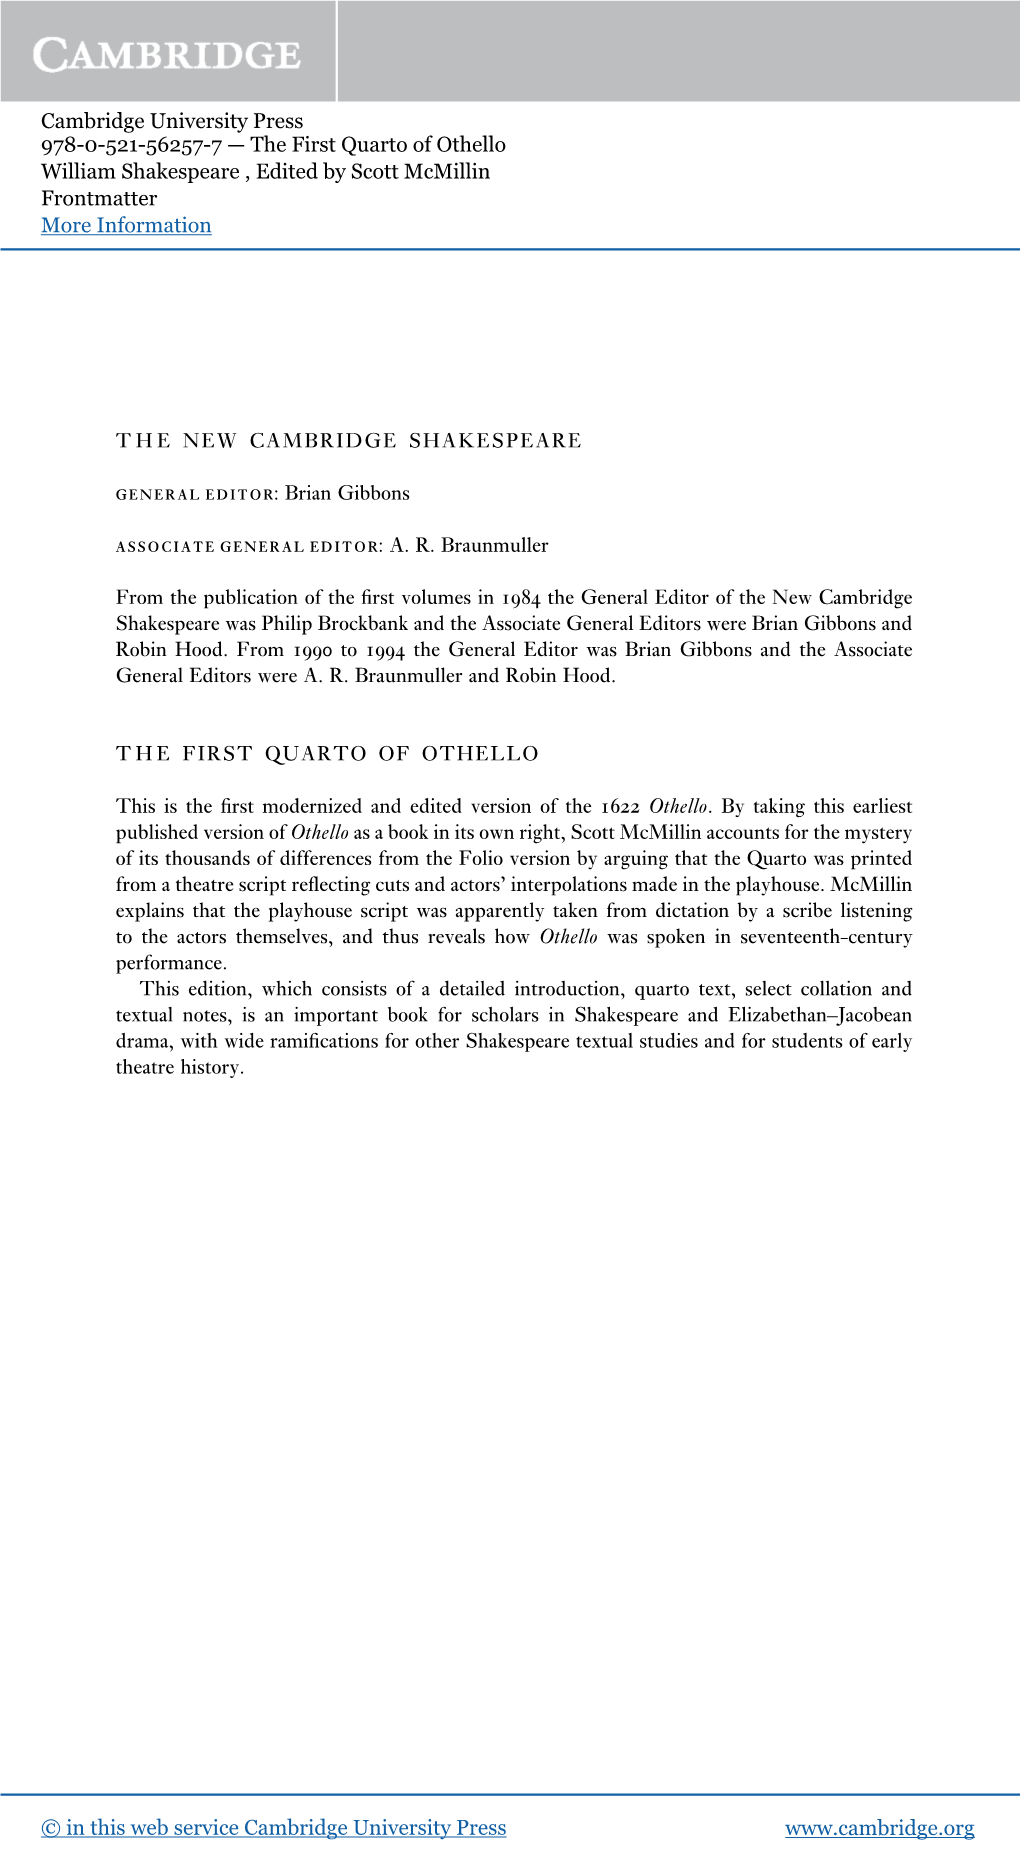 Cambridge University Press 978-0-521-56257-7 — the First Quarto of Othello William Shakespeare , Edited by Scott Mcmillin Frontmatter More Information